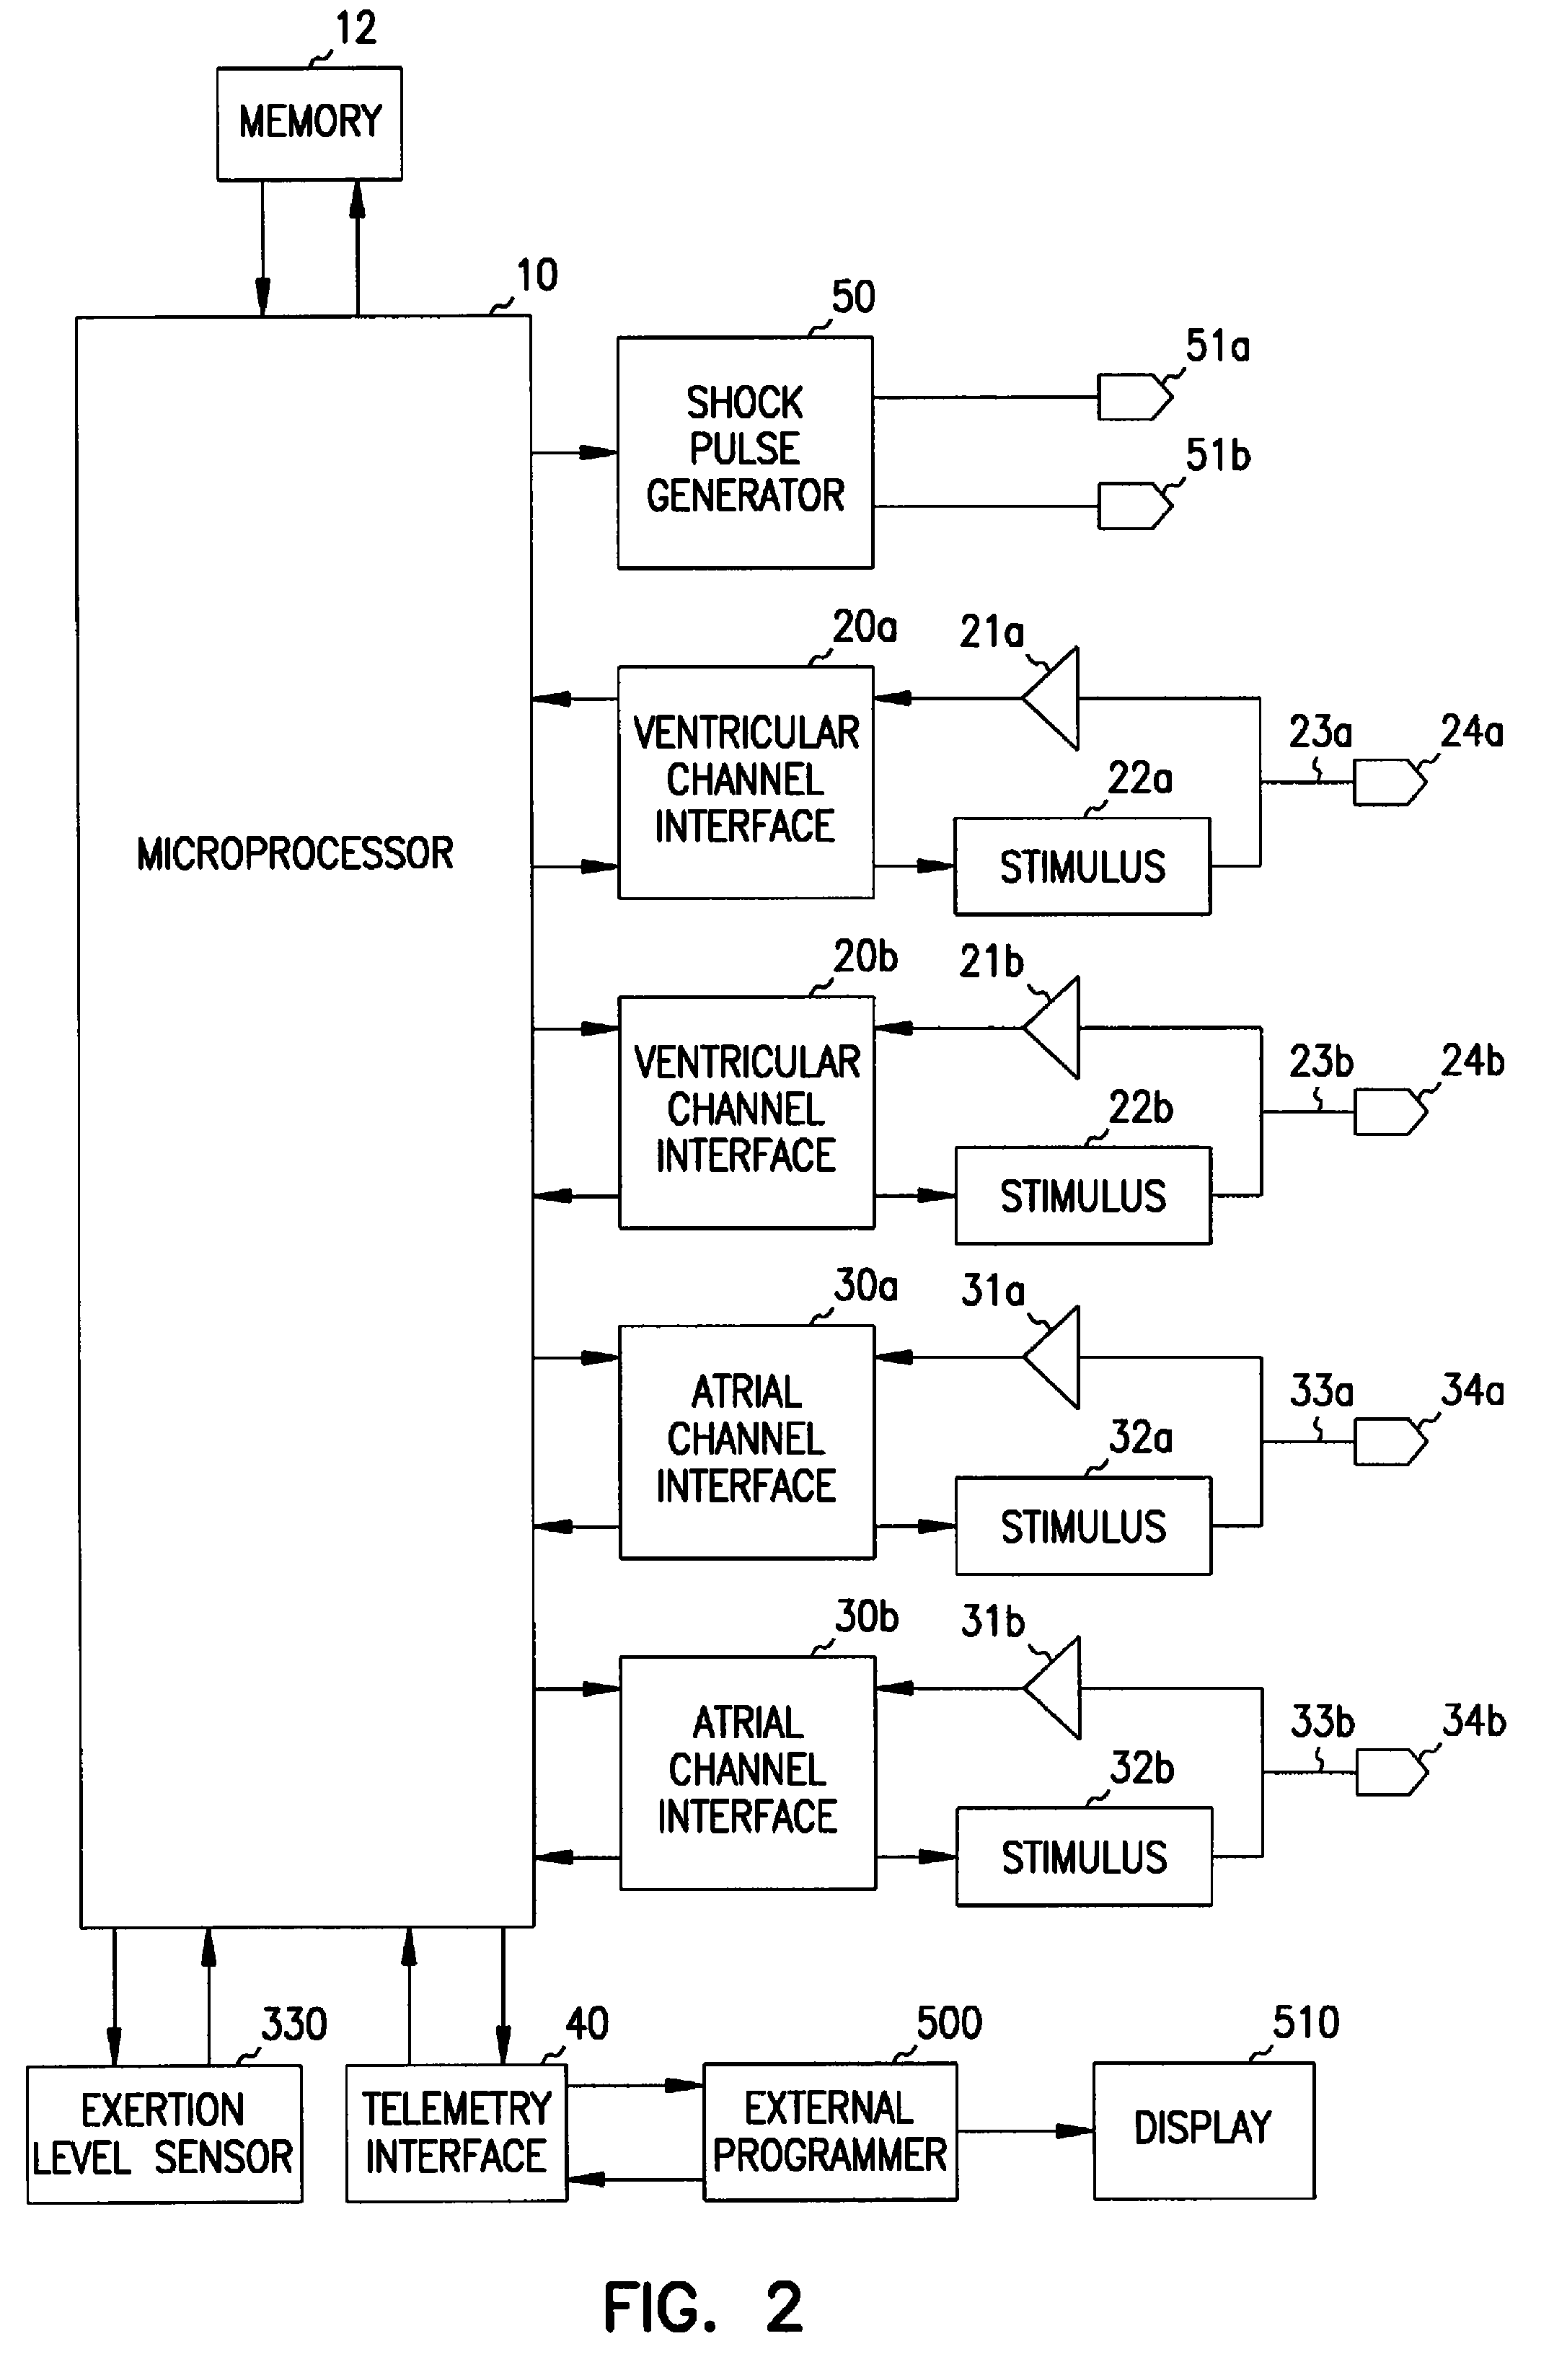 Apparatus and method for ventricular rate regularization